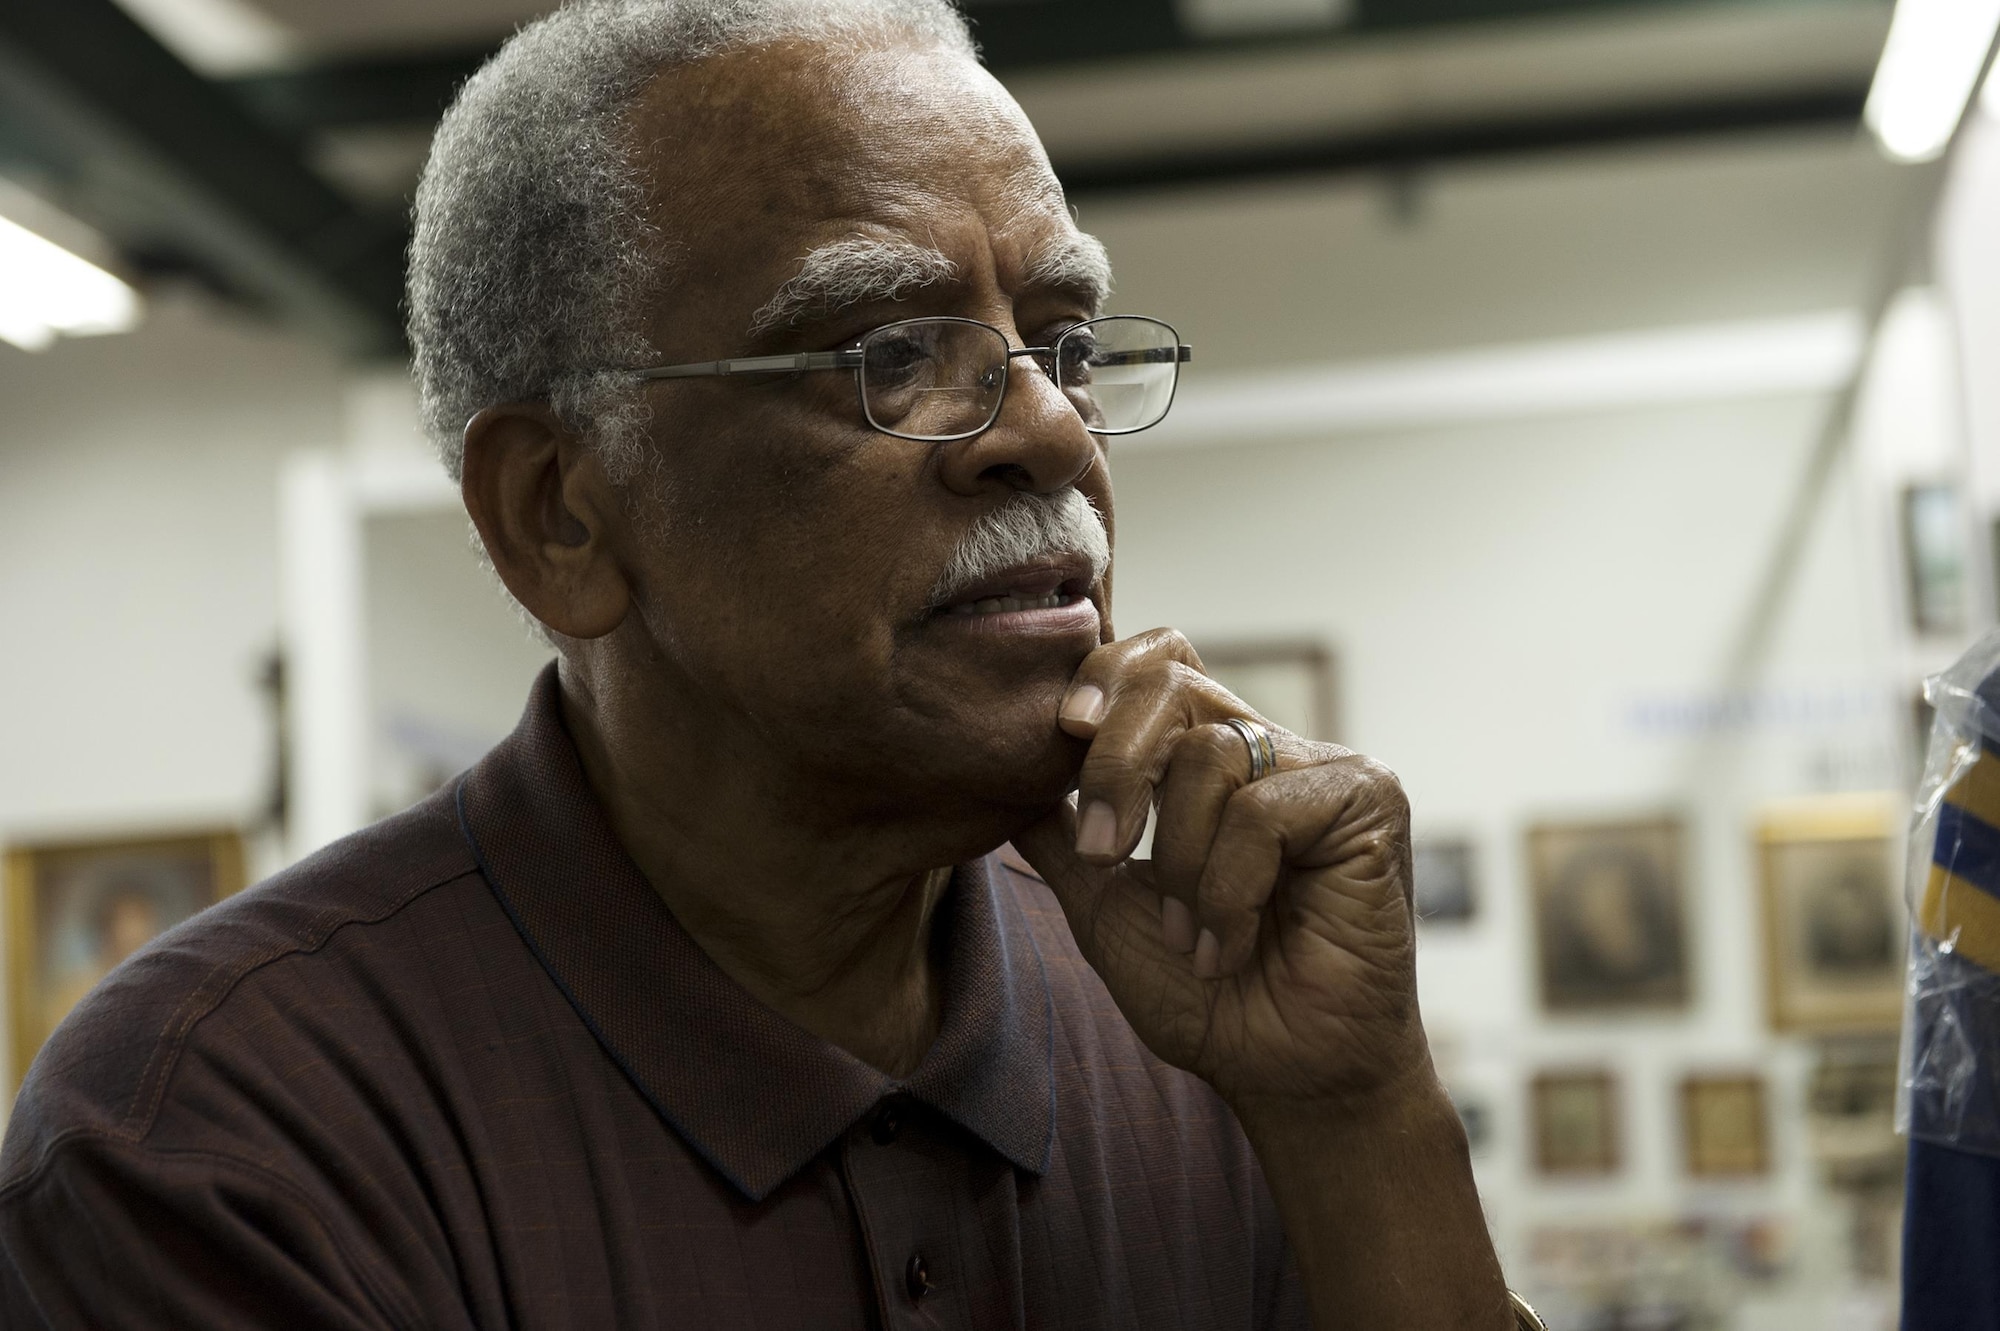 Retired Chief Master Sgt. James “Jack” Hadley, Black History Museum curator, reminisces on his childhood, Feb. 8, 2016, in Thomasville, Ga. Hadley grew up at Pebble Hill, a former Thomasville cotton plantation, before enlisting in the Air Force and serving his country for 28 years. (U.S. Air Force photo/Airman 1st Class Kathleen D. Bryant)